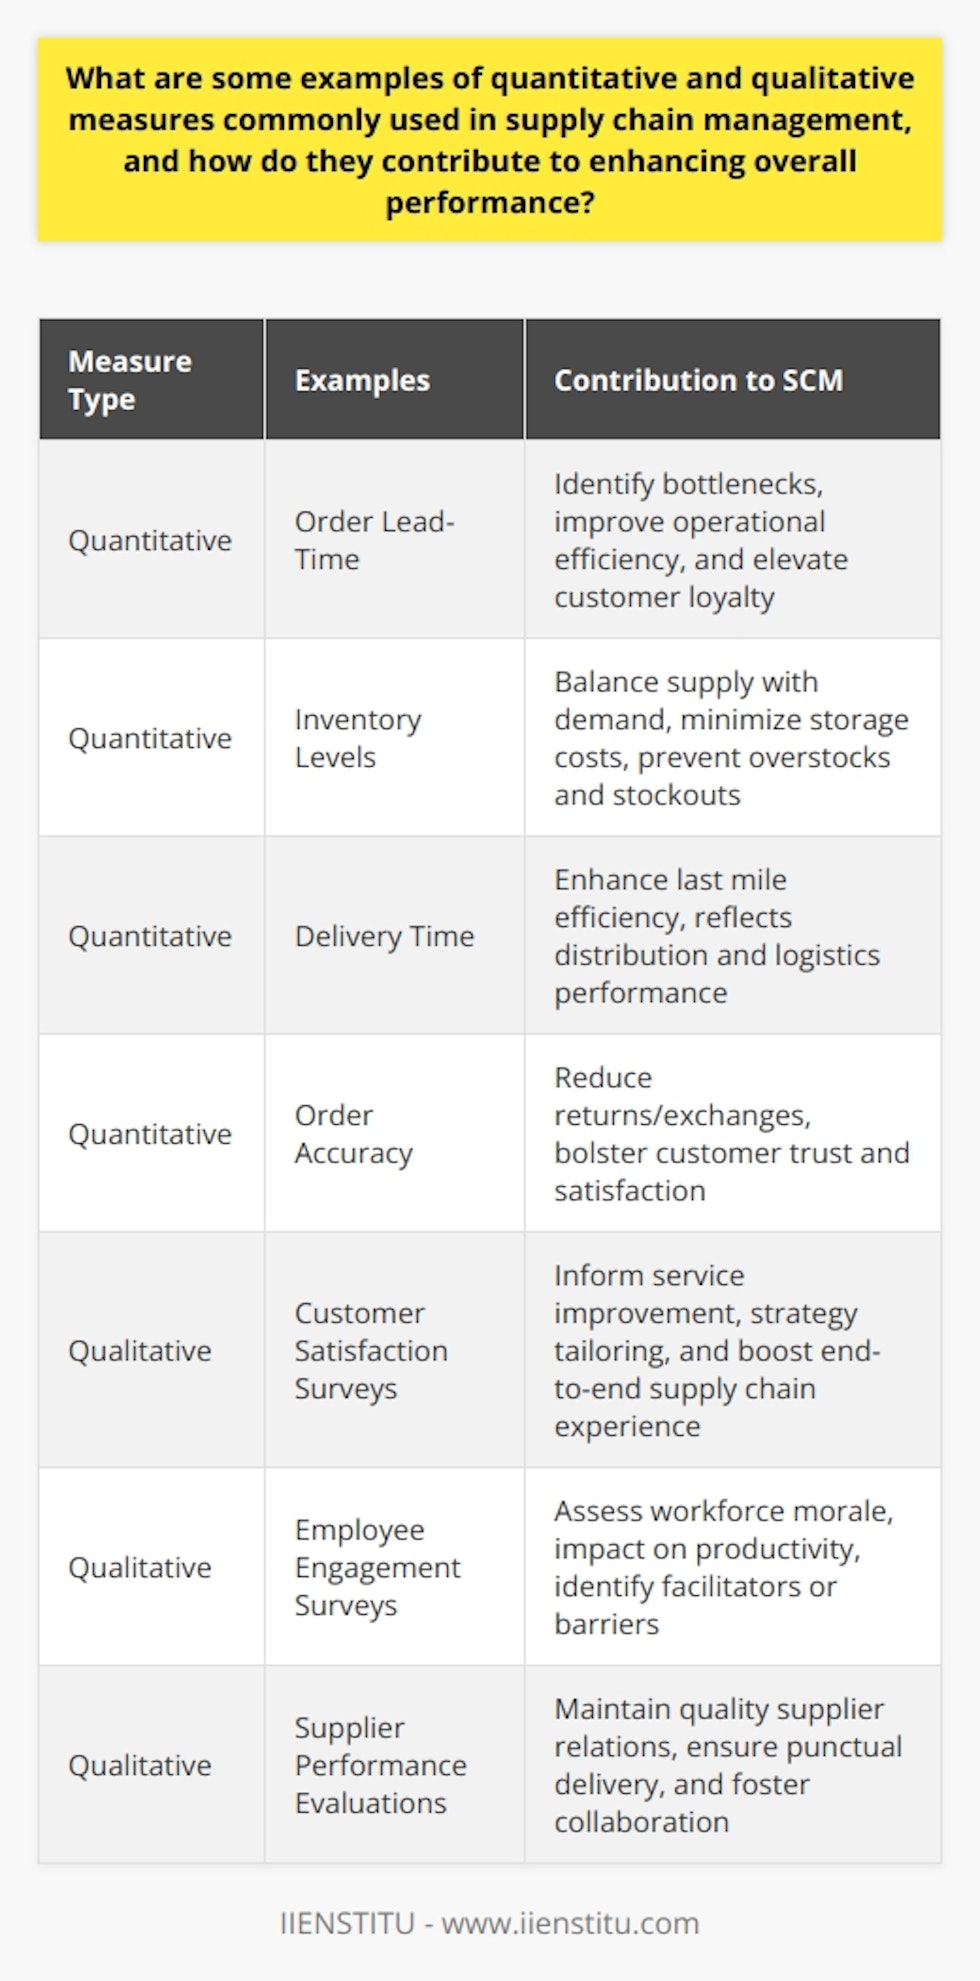 In the realm of supply chain management (SCM), the blend of quantitative and qualitative measures is a strategic approach to holistic improvement and competitive advantage. These metrics serve as the guidelines that steer organizations towards optimal performance and customer-centric operations. **Quantitative Measures in SCM**Quantitative metrics offer precise, numerical data points that drive decision-making in SCM. These numbers furnish a clear grasp of an organization's operational efficacy, logistical capabilities, and customer service performance.- **Order Lead-Time**: The period between the receipt of the customer’s order and the delivery of the product. Short lead-times signal efficiency and enhance customer loyalty. By analyzing lead times, companies can unearth bottlenecks in the process and work coherently to streamline operations.- **Inventory Levels**: Maintaining an optimal stock level is pivotal to meet customer demand without overcapitalizing on storage. Effective inventory management reduces overstocks and stockouts, ensuring a balance that sustains ready supply while curtailing holding costs.- **Delivery Time**: This is a measure of the 'last mile' in SCM—the timeline for goods to travel from the warehouse to the customer's hands. Performance in delivery time reflects the effectiveness of a company's distribution and logistics strategies.- **Order Accuracy**: Relates to the congruence of delivered items with customer orders. High accuracy reduces costly returns and exchange processes, fostering customer trust and satisfaction.**Qualitative Measures in SCM**Qualitative indicators, though non-numerical, are equally vital. They capture the subjective aspects that quantitative metrics may overlook. These perceptions and viewpoints help sculpt a comprehensive narrative of the supply chain’s functionality.- **Customer Satisfaction Surveys**: Insights gleaned from customer feedback are integral to shaping the SCM strategy. These surveys unravel how customers perceive the quality, delivery, and overall service, enabling companies to refine the end-to-end supply chain experience.- **Employee Engagement Surveys**: The involvement and satisfaction of the workforce directly impact productivity and operational efficiency. Surveys can diagnose the organizational climate and unveil dynamics that might impede or facilitate supply chain performance.- **Supplier Performance Evaluations**: A thorough assessment of suppliers' quality, delivery punctuality, and collaboration manners. Regular evaluations help maintain symbiotic, quality-driven relationships with suppliers, which is crucial for SCM success.**Enhancing Overall Performance**Utilizing both quantitative and qualitative measures, organizations can foster a responsive and adaptable supply chain. Quantitative data helps track efficiency and lead-time improvements, while qualitative aspects fortify customer relationships and workplace morale. It is the synthesis of both datasets that enables organizations to enact substantive, customer-centric improvements. Supply chain managers can pinpoint areas for cost reductions, expedite processing times, and improve product quality, thus, bolstering the company's market position.In conclusion, a deft combination of quantitative and qualitative measures infuses depth into SCM, aiding businesses in their quest for continuous improvement and competitive edge. By regularly evaluating and acting upon these measures, organizations can ensure a supply chain that is not only efficient but also resilient and attuned to the evolving demands of customers and the global market.